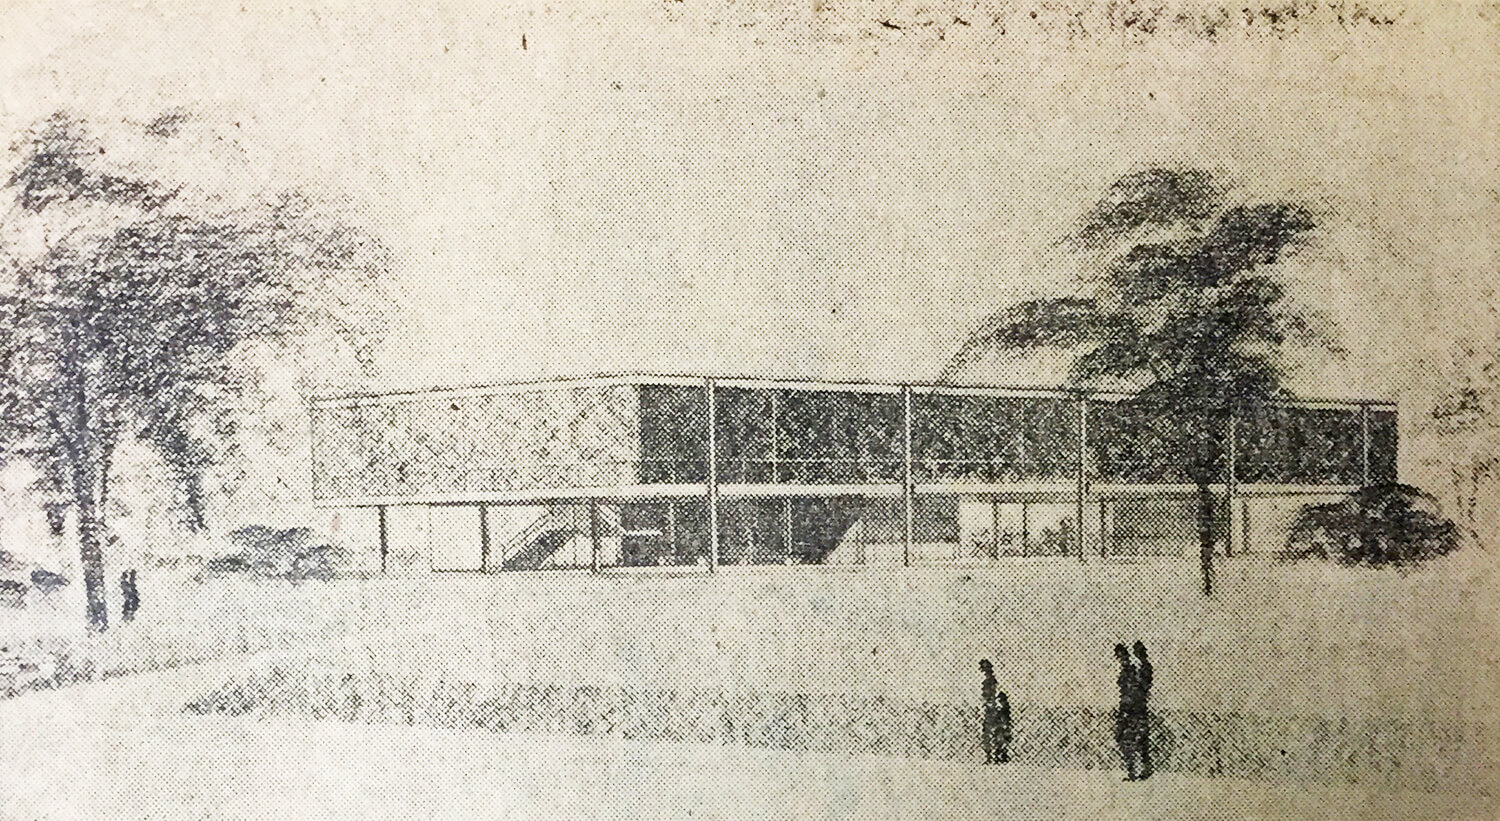 Sketch of a glass-clad floor elevated over a plaza